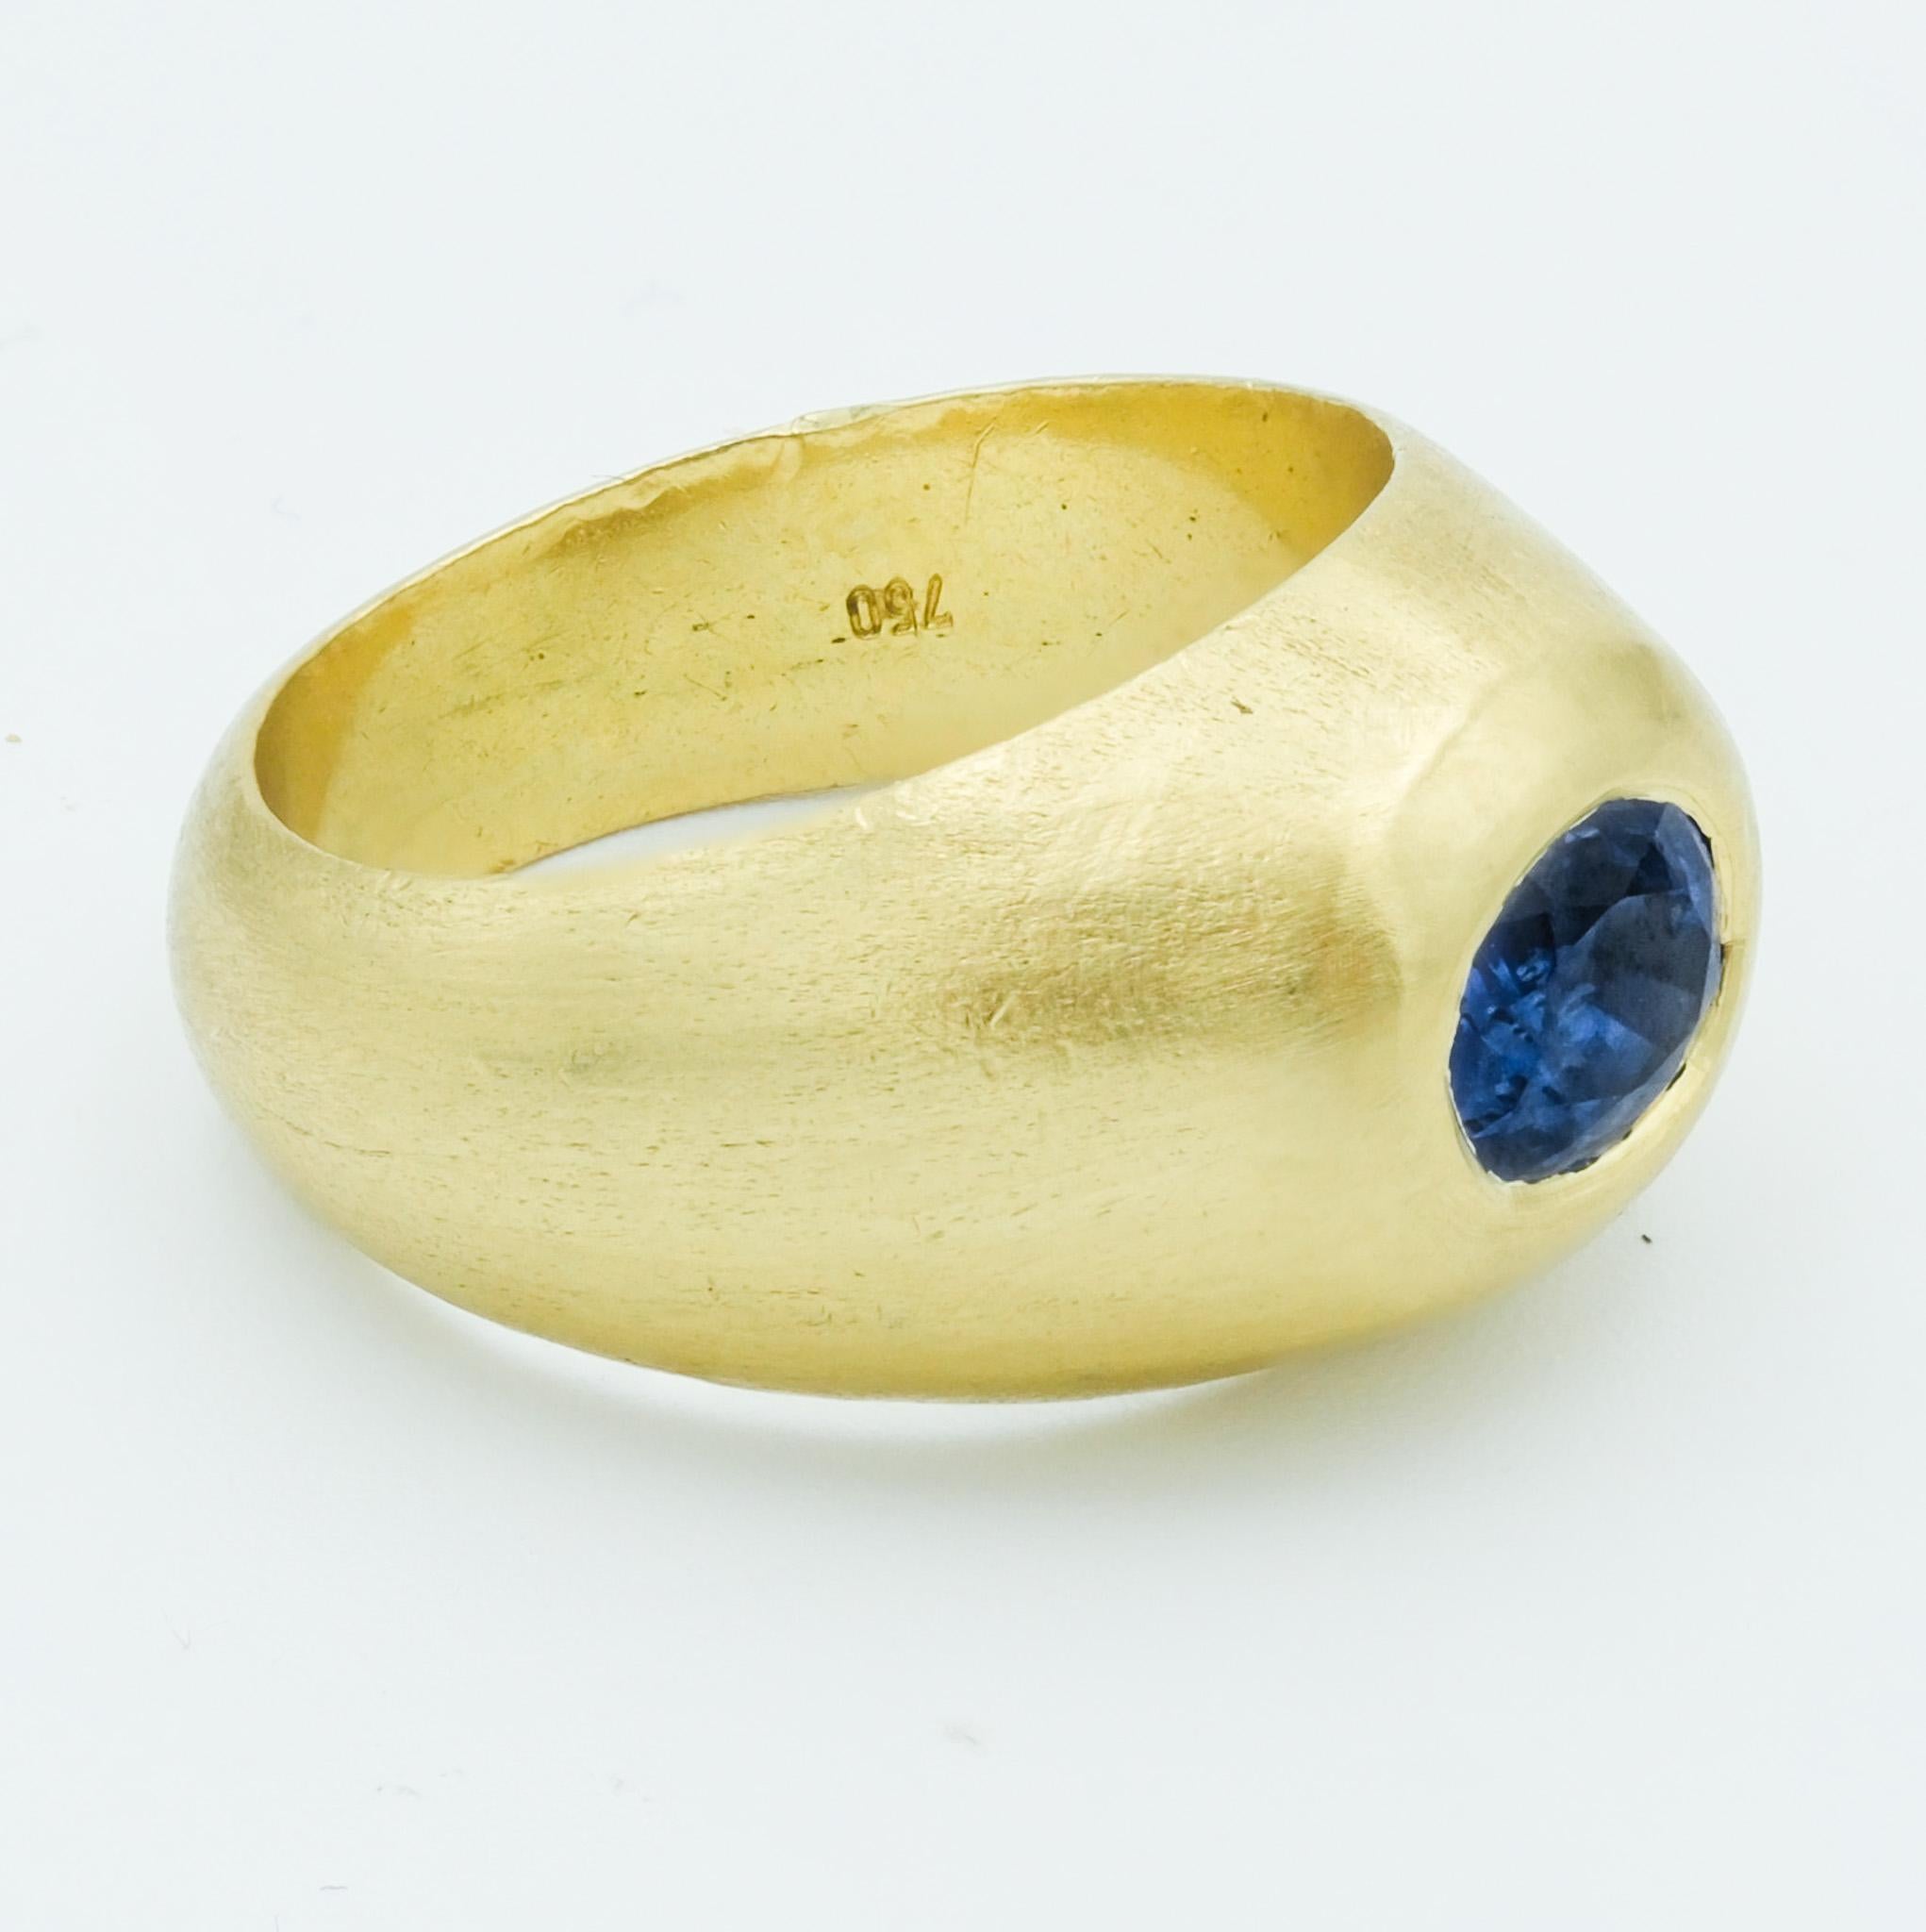 This 18k yellow gold ring, a vintage treasure from the distinguished house of Gübelin, encapsulates classic elegance. Centered with a nearly 1 carat sapphire of striking blue, the gemstone’s vivacity and luminosity are undeniable, compelling